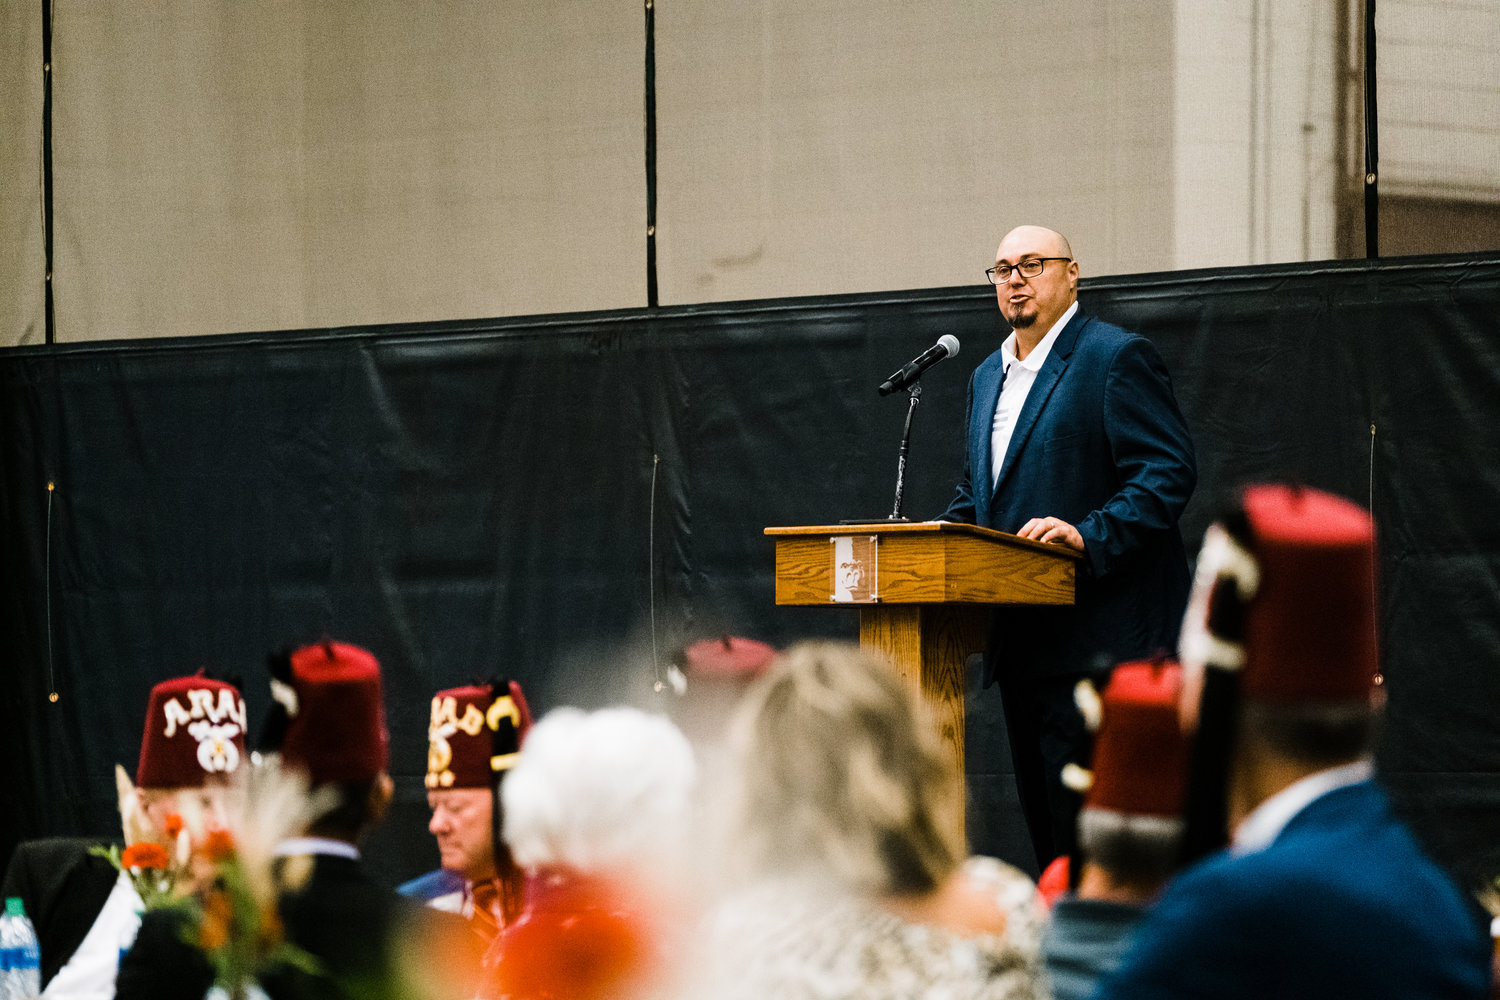 On Friday during the 49th Kansas Shrine Bowl Banquet, B.J. Harris served as emcee.